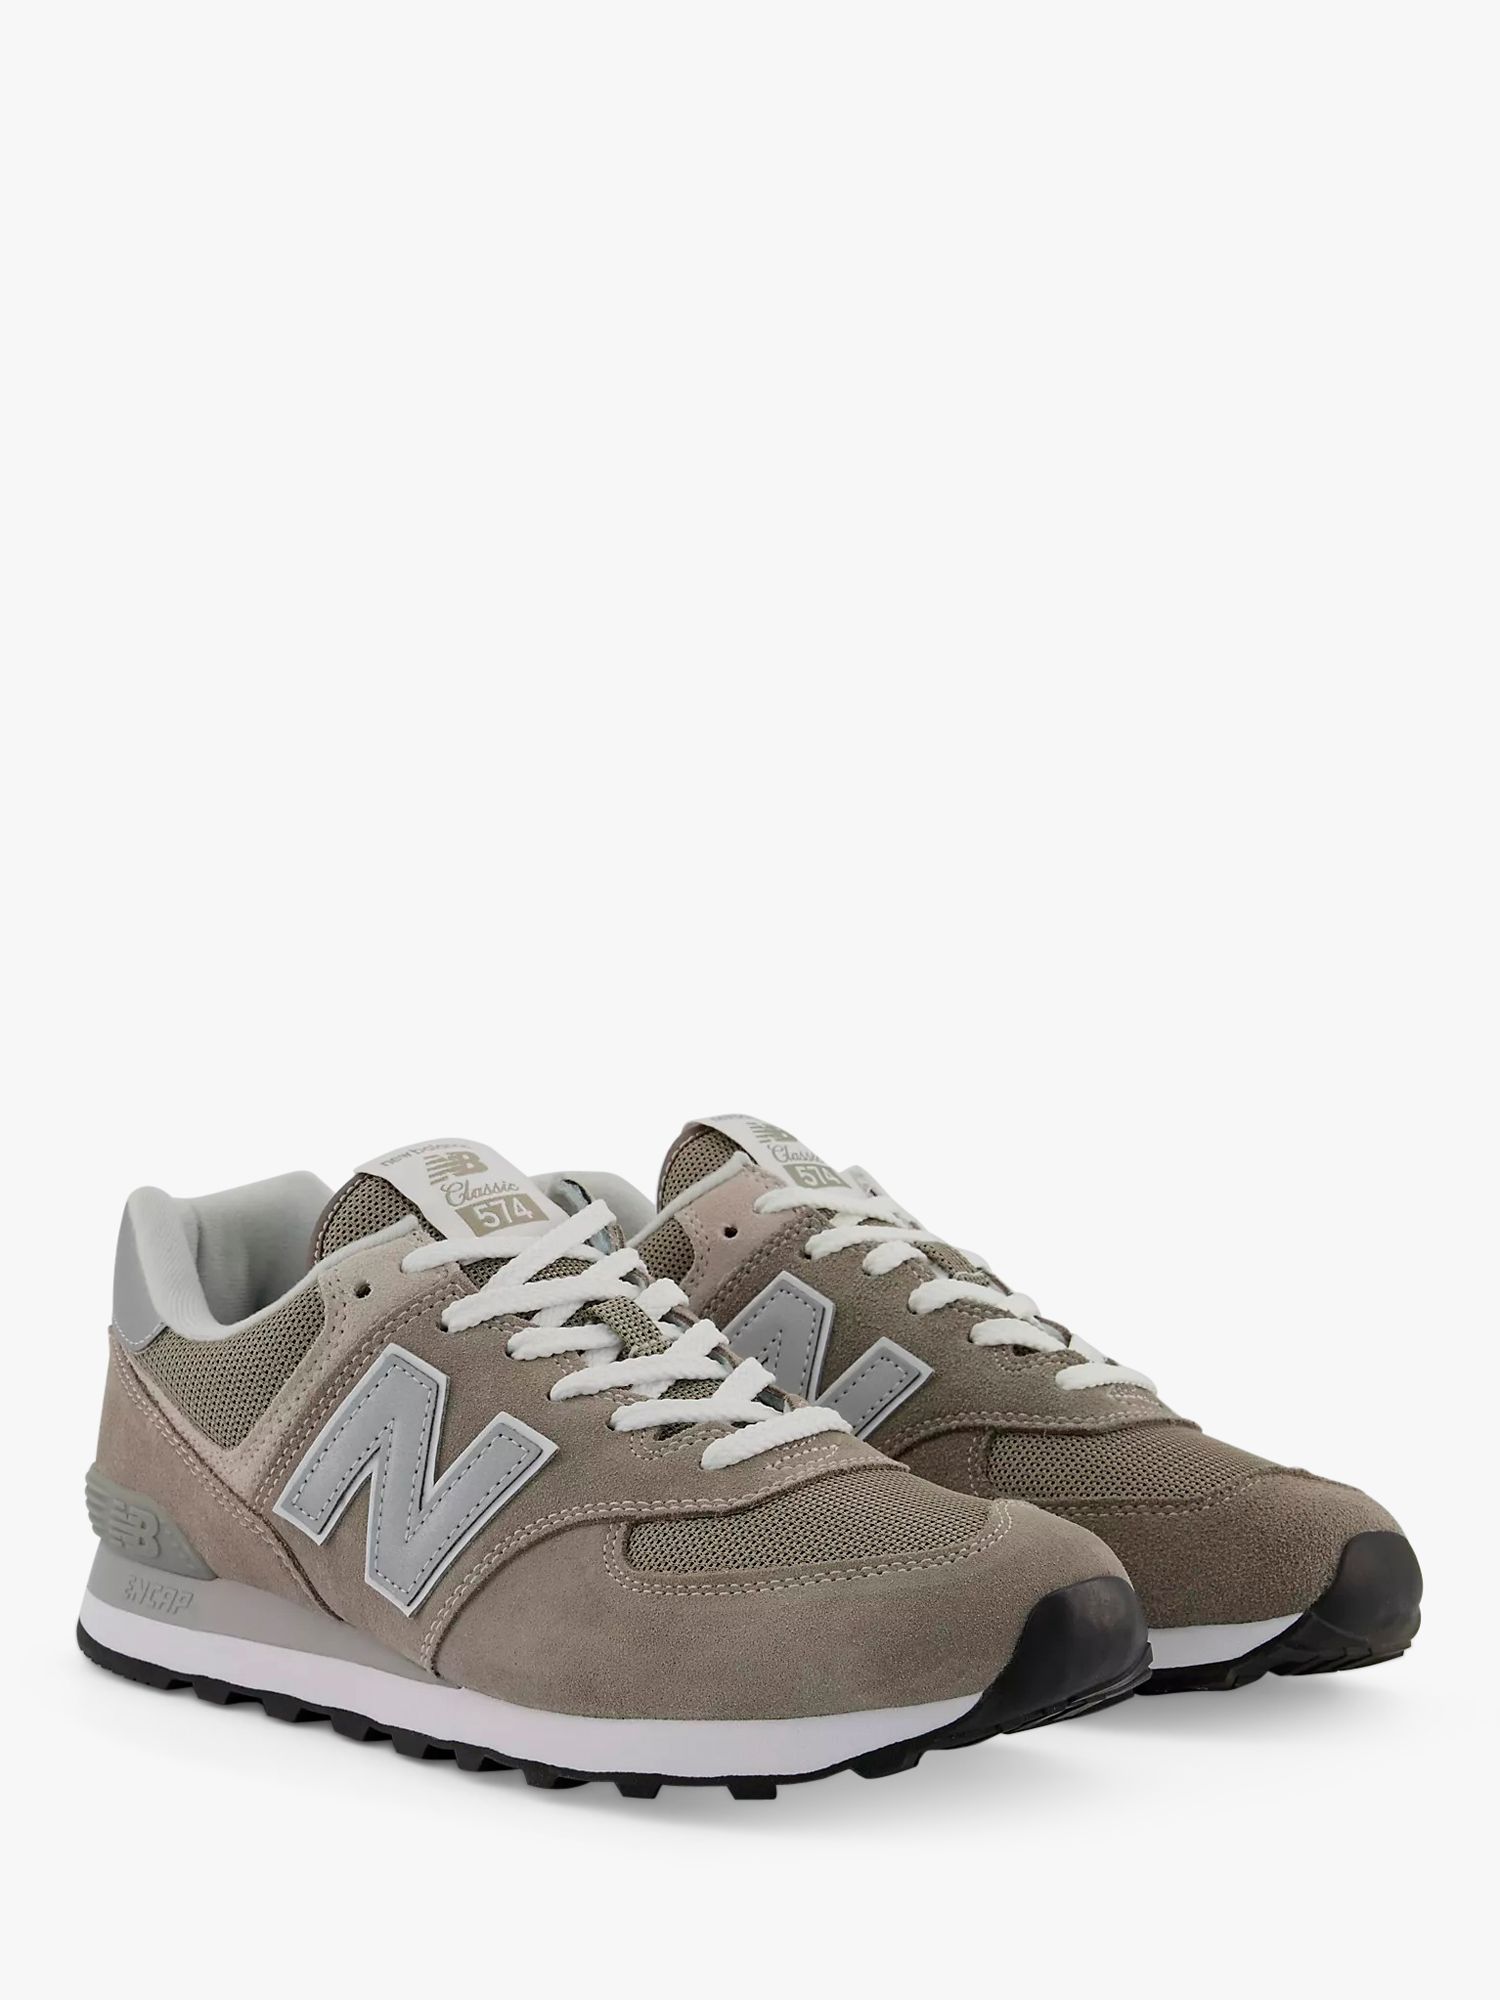 New Balance 574 Suede Trainers, Grey at John Lewis & Partners